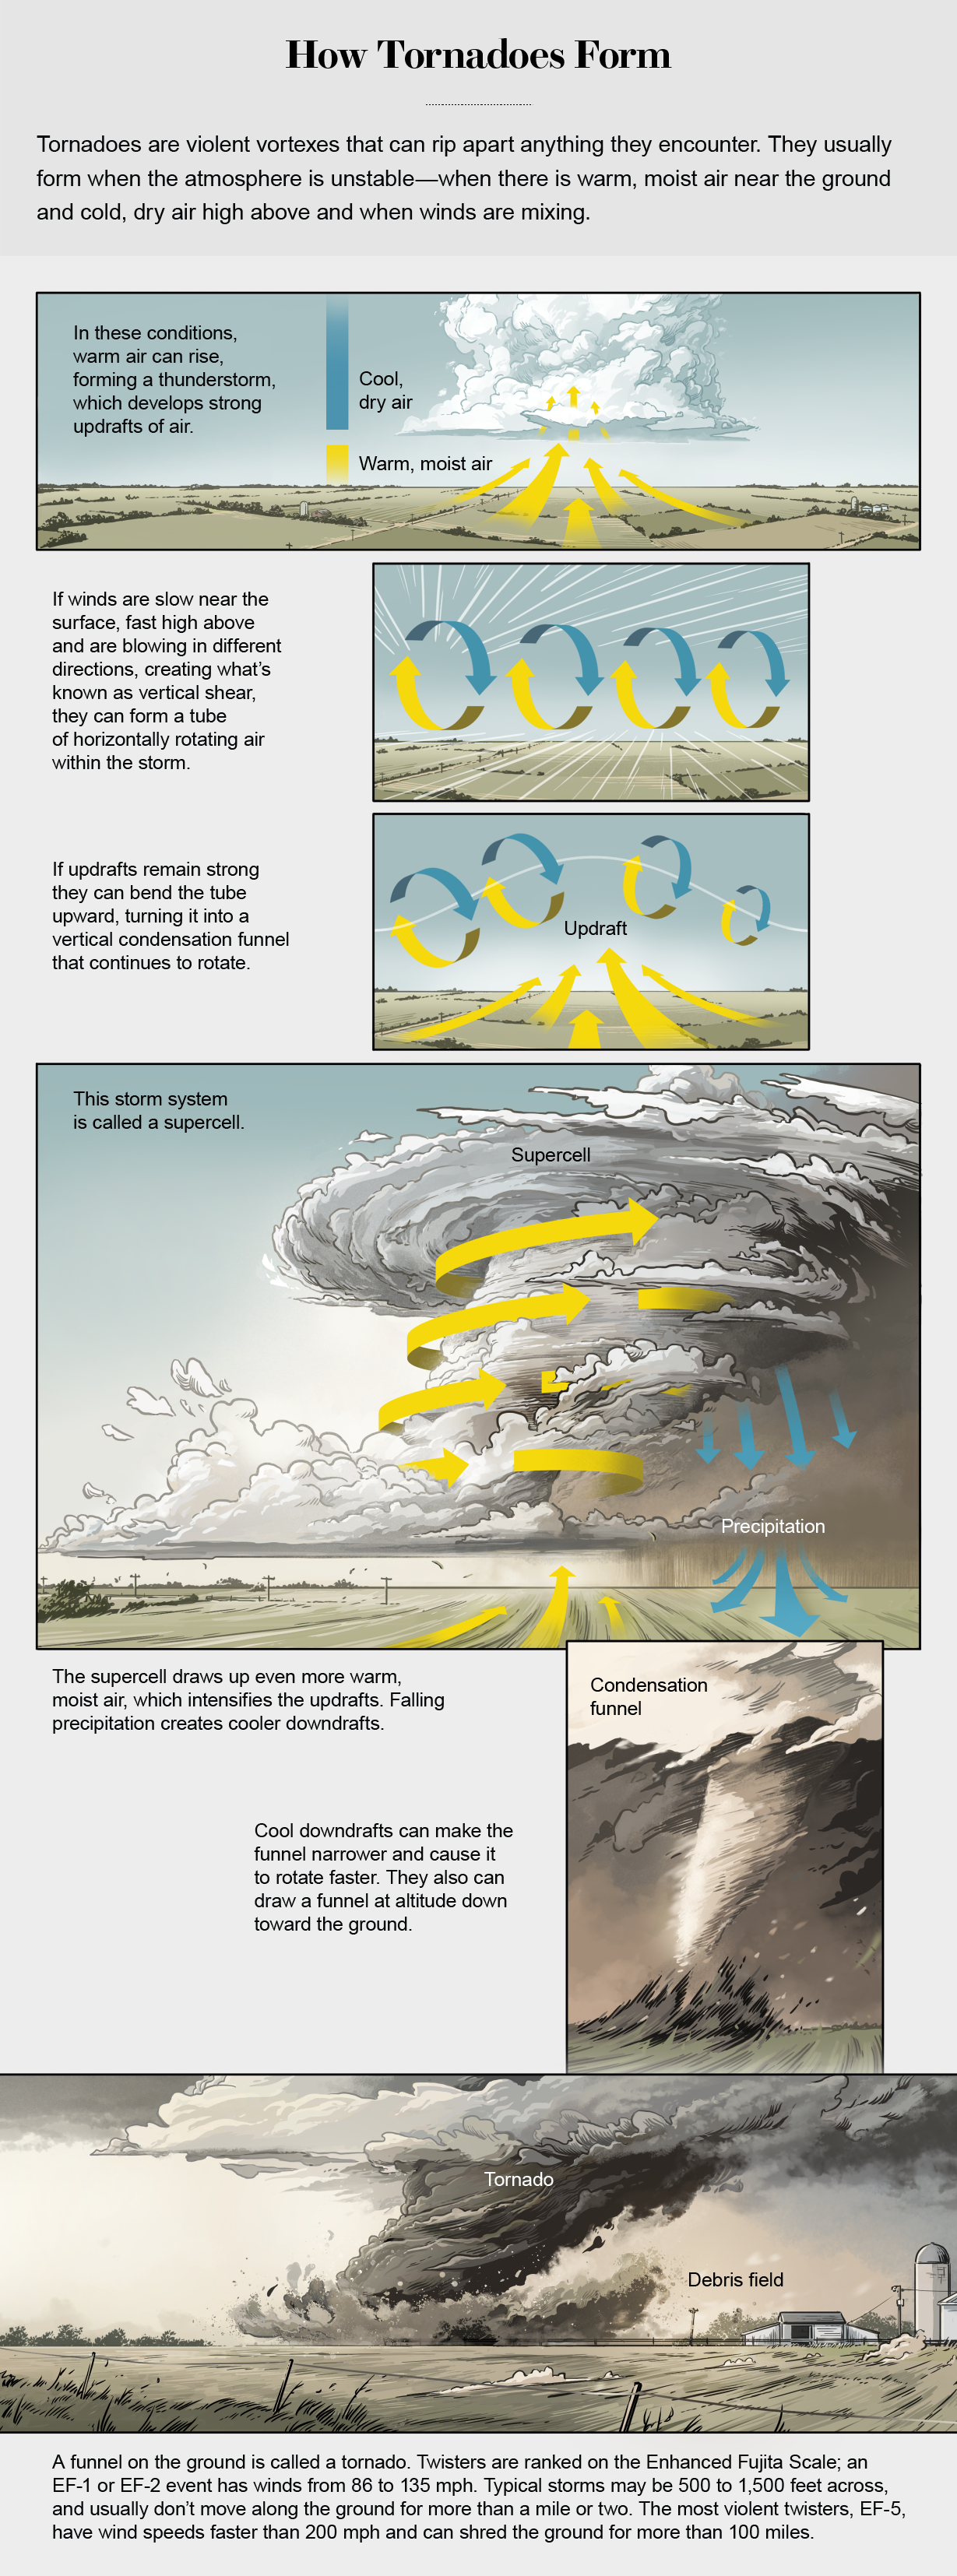 Graphic shows how vertical shear can form a tube of horizontally rotating air, with warm, moist air near the ground and cold, dry air above. Strong updrafts can bend the tube, resulting in a tornado.